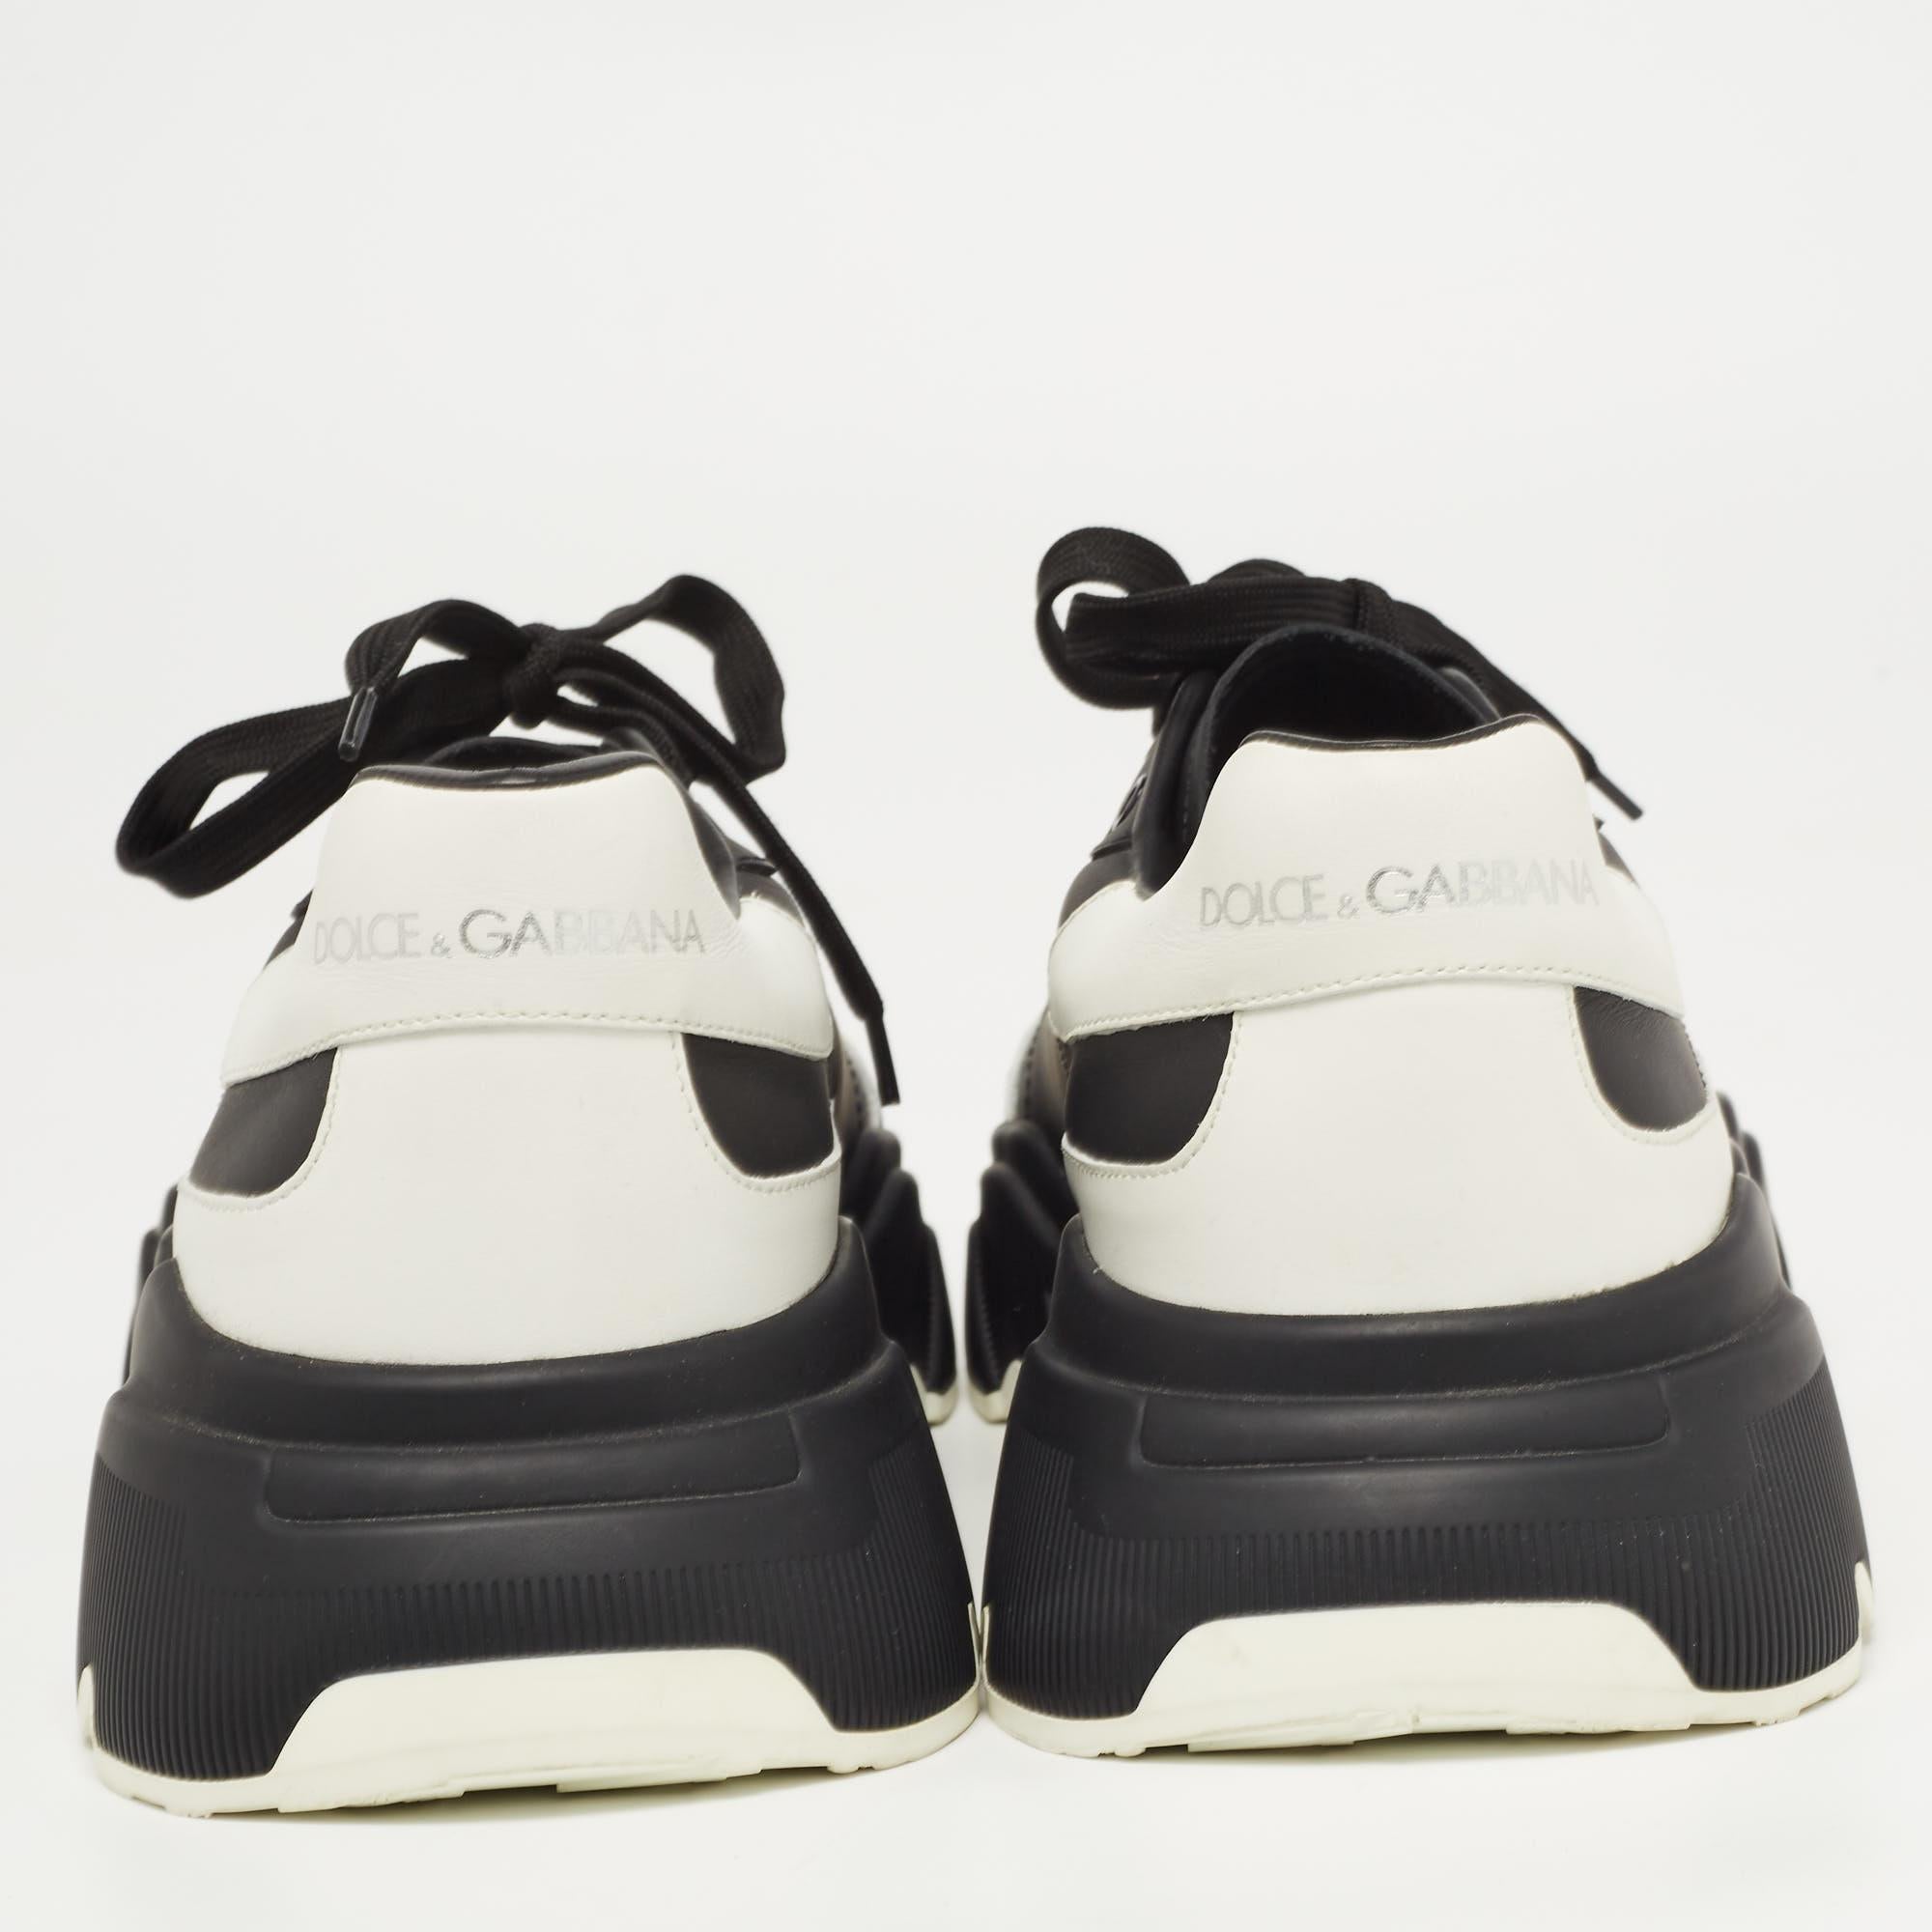 Dolce & Gabbana Black/White Leather Daymaster Sneakers Size 46 2